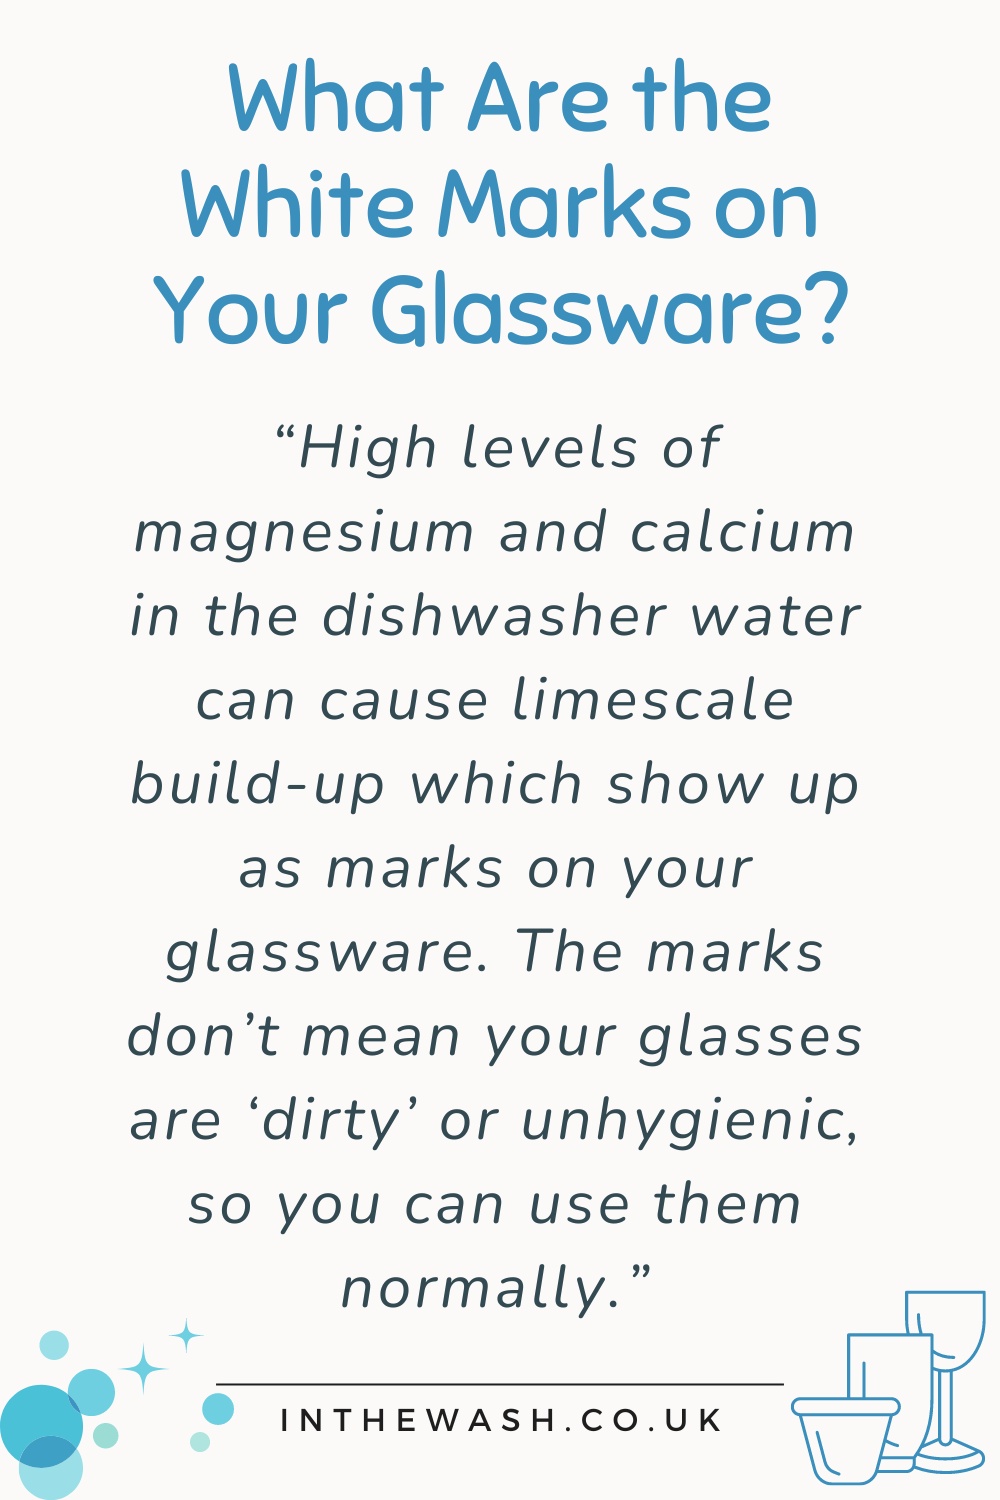 What are the white marks on your glassware?